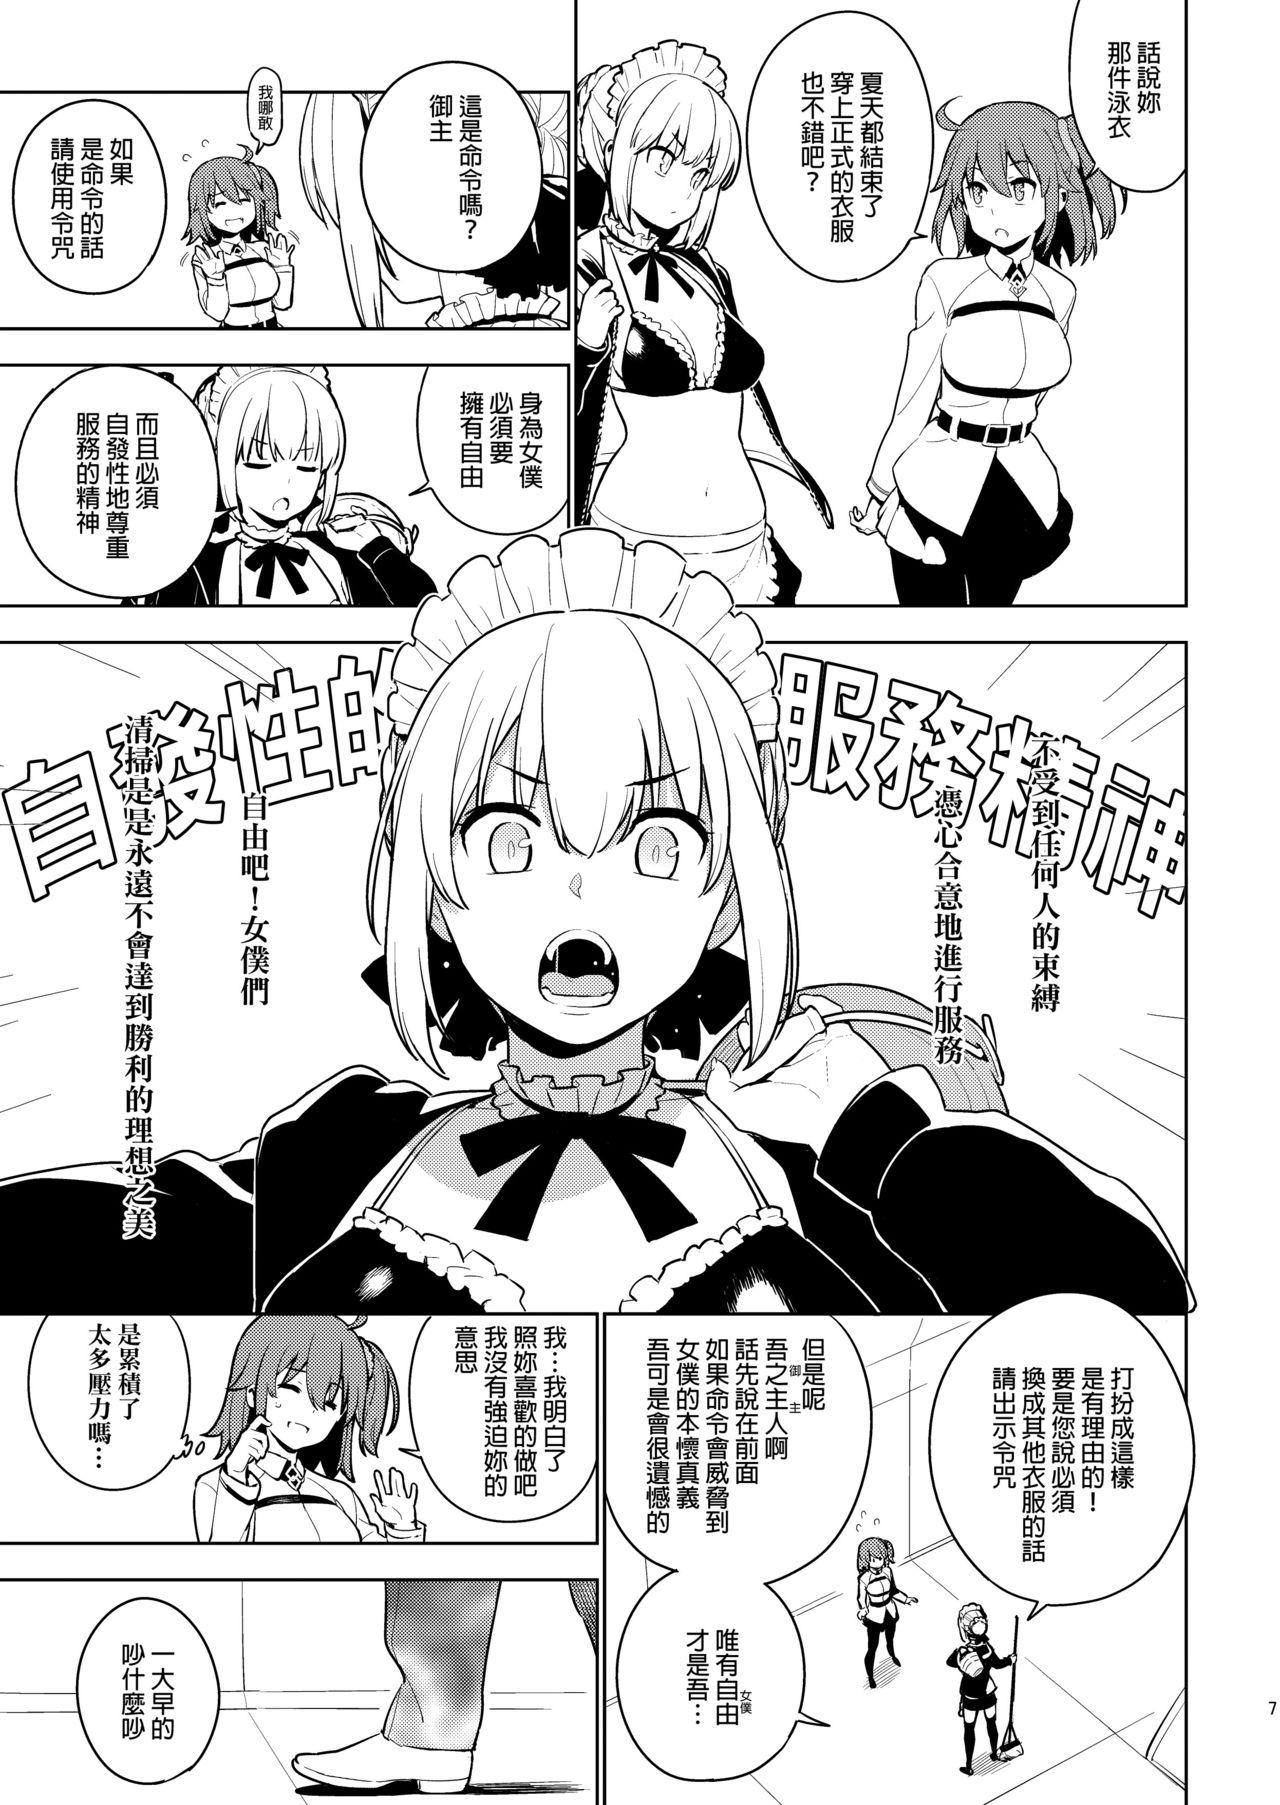 Asians DELUSION - Fate grand order Hardcoresex - Page 6